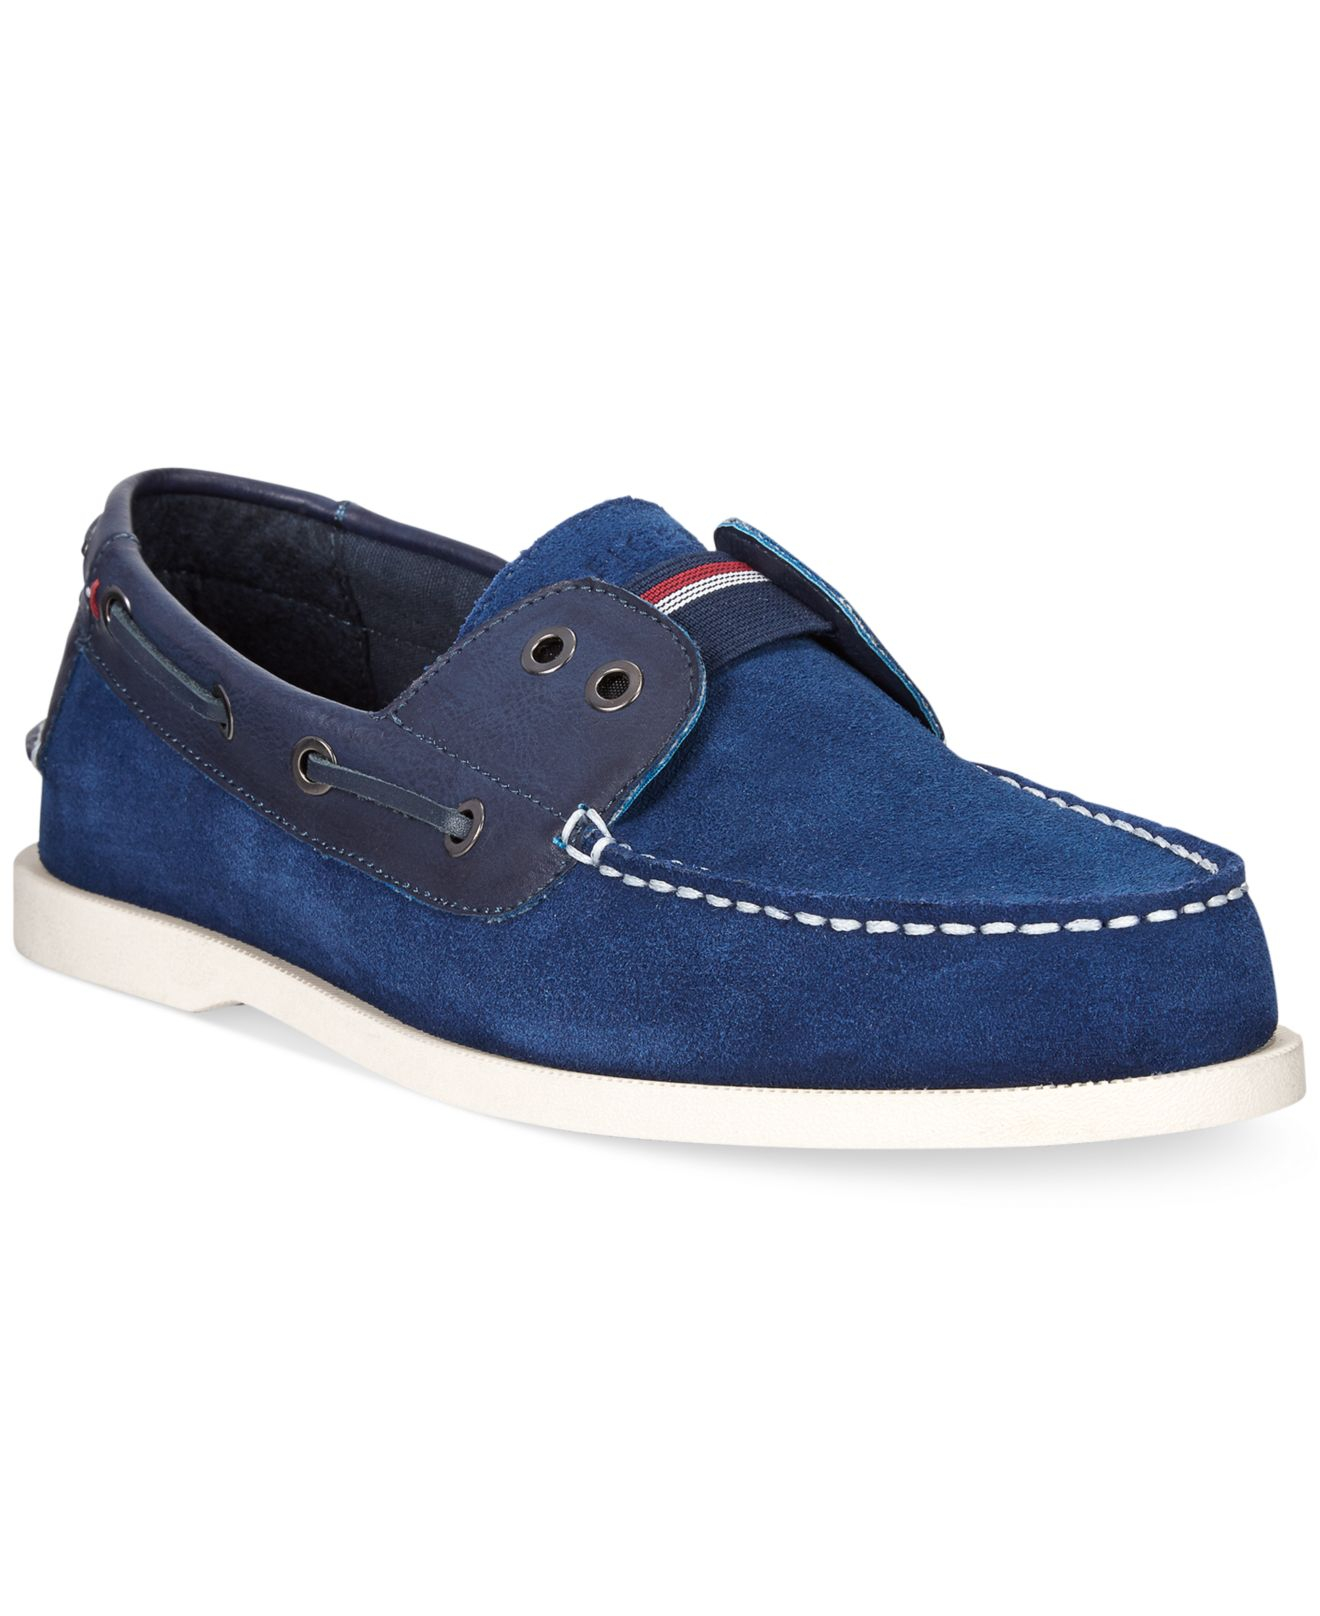 Lyst - Tommy Hilfiger Bullhead Suede Boat Shoes in Blue for Men